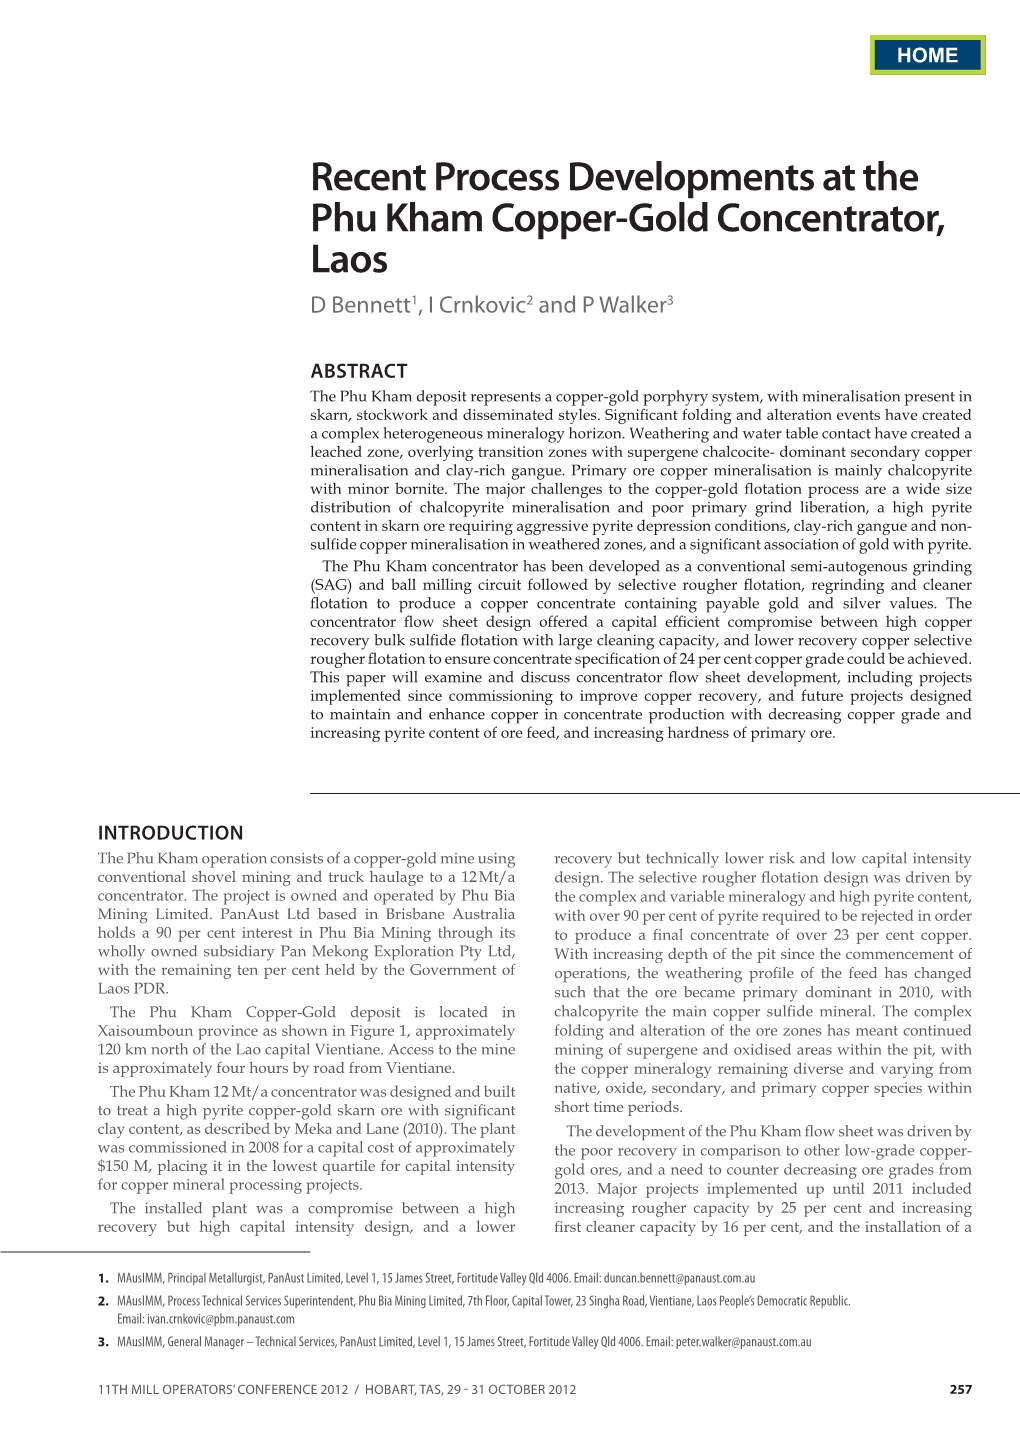 Recent Process Developments at the Phu Kham Copper-Gold Concentrator, Laos D Bennett 1, I Crnkovic2 and P Walker3